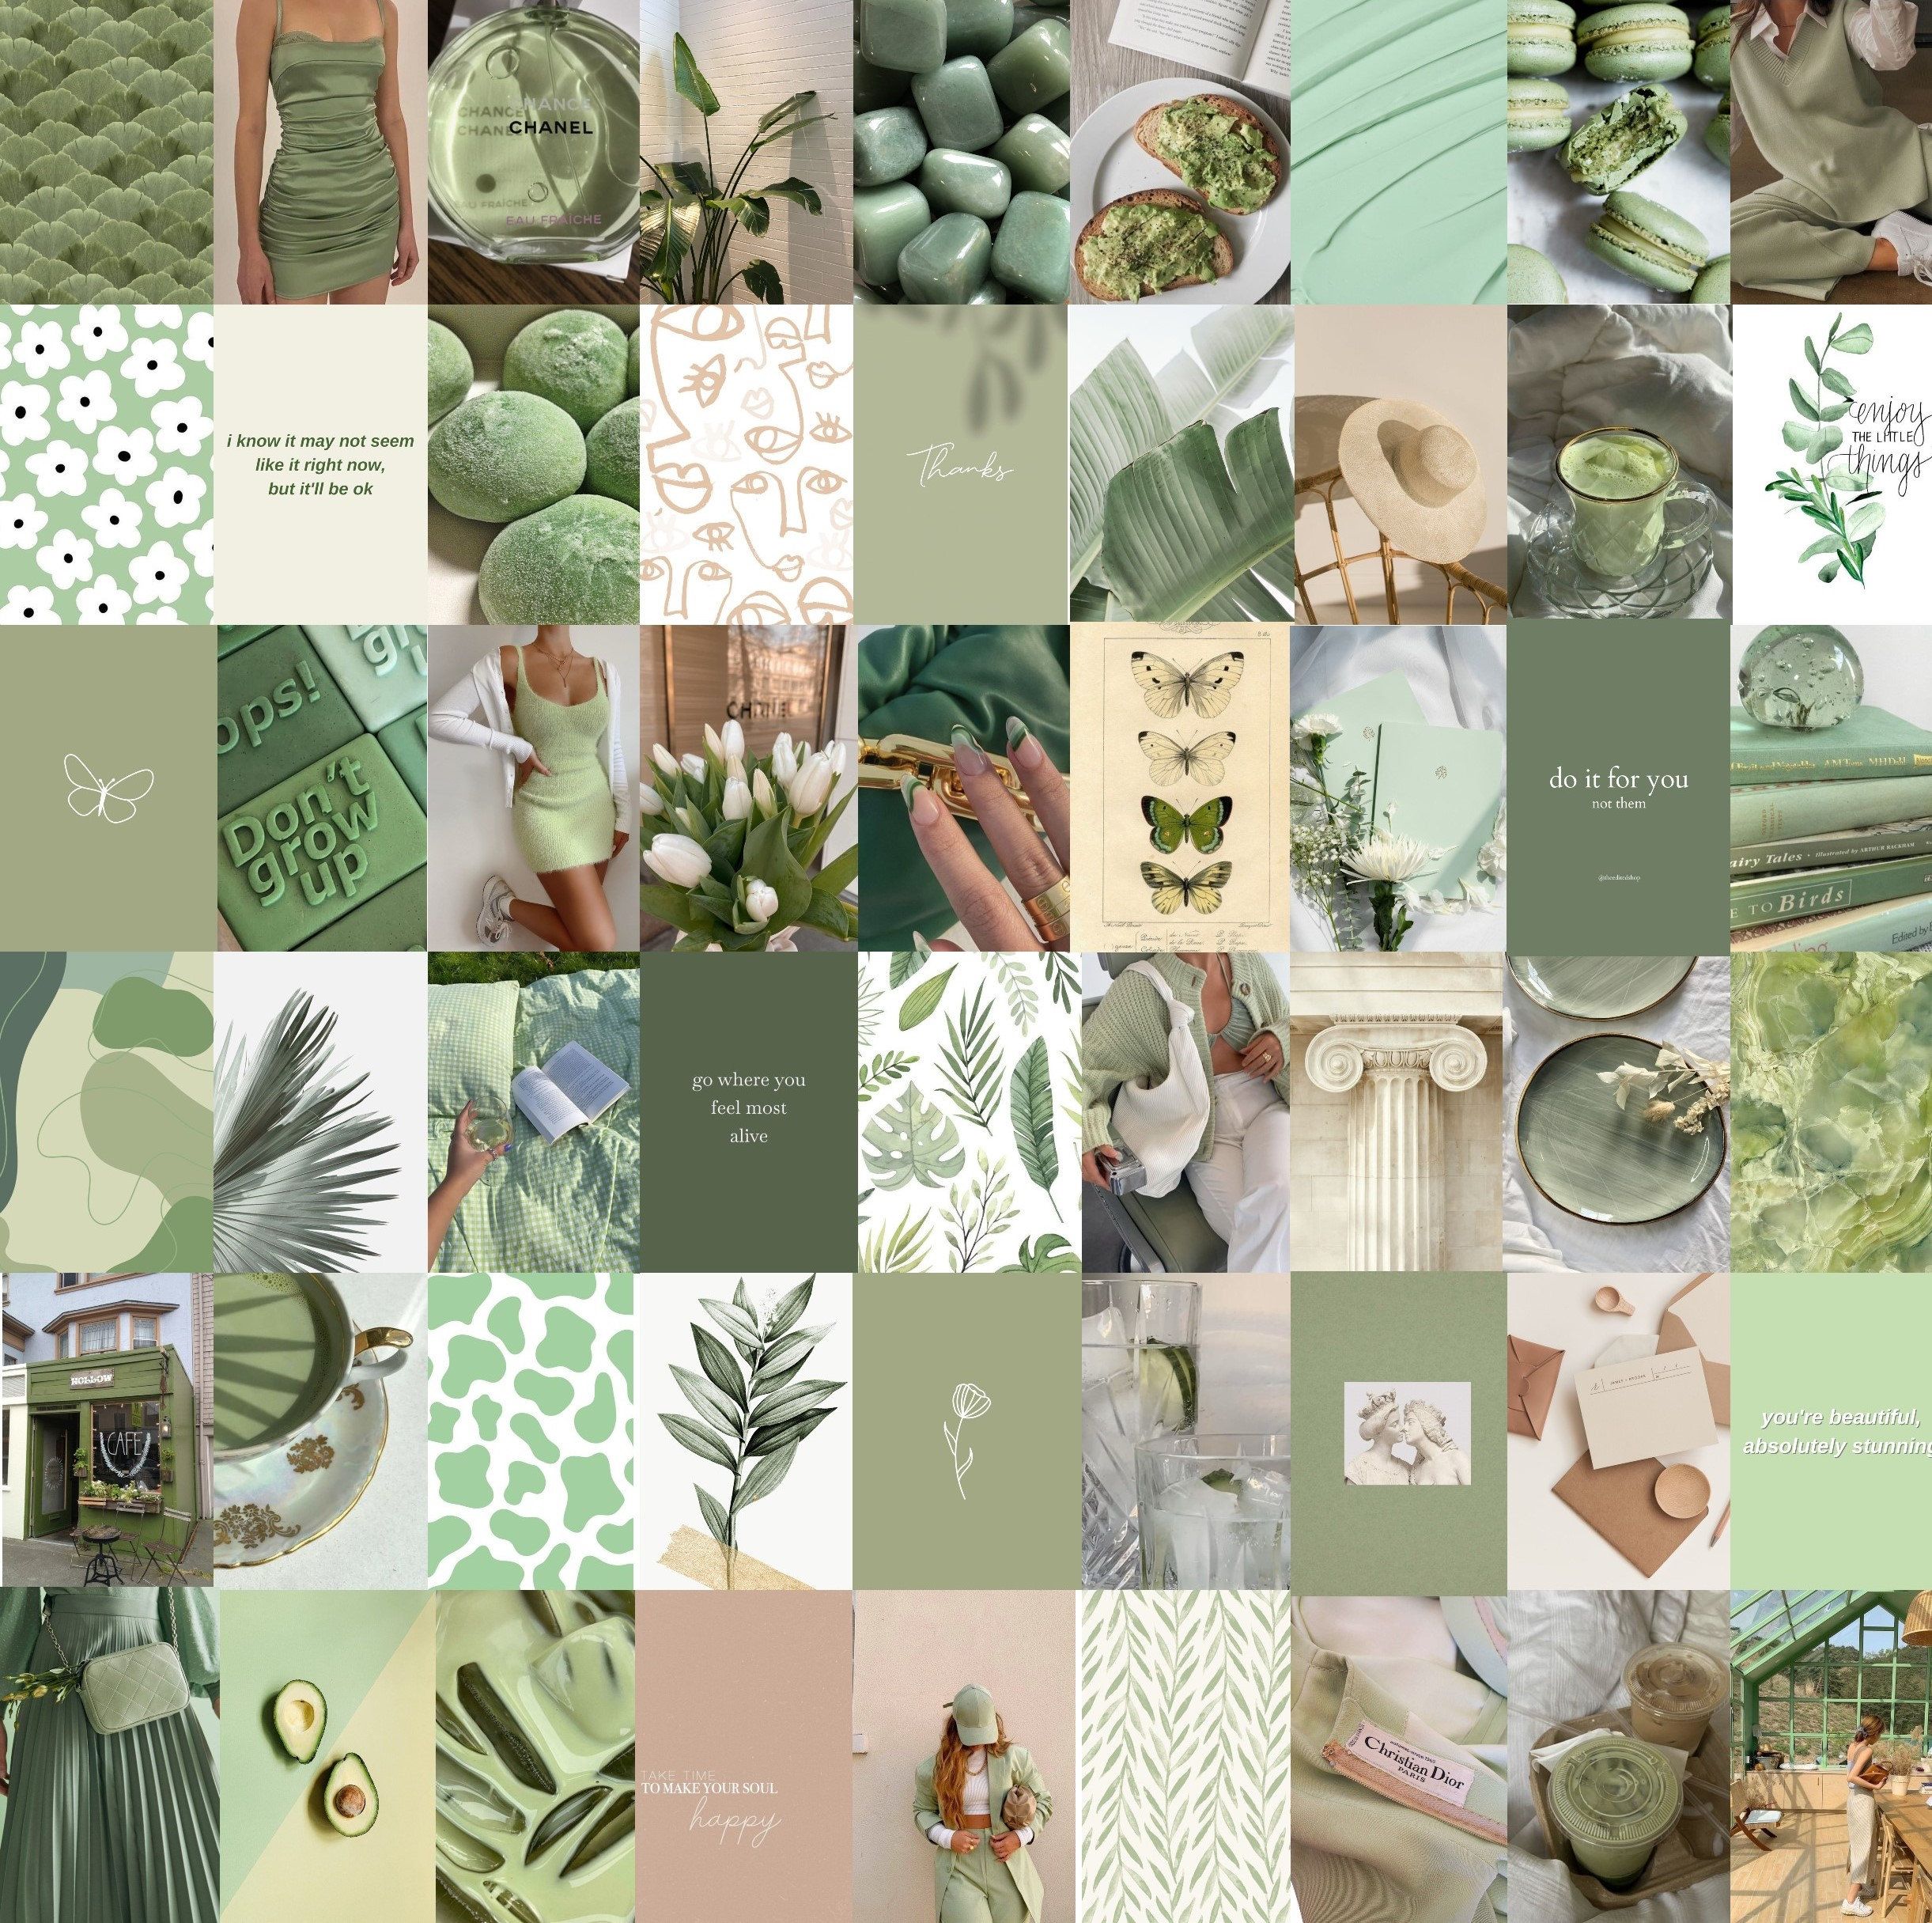 A collage of photos of green and white objects. - Mint green, sage green